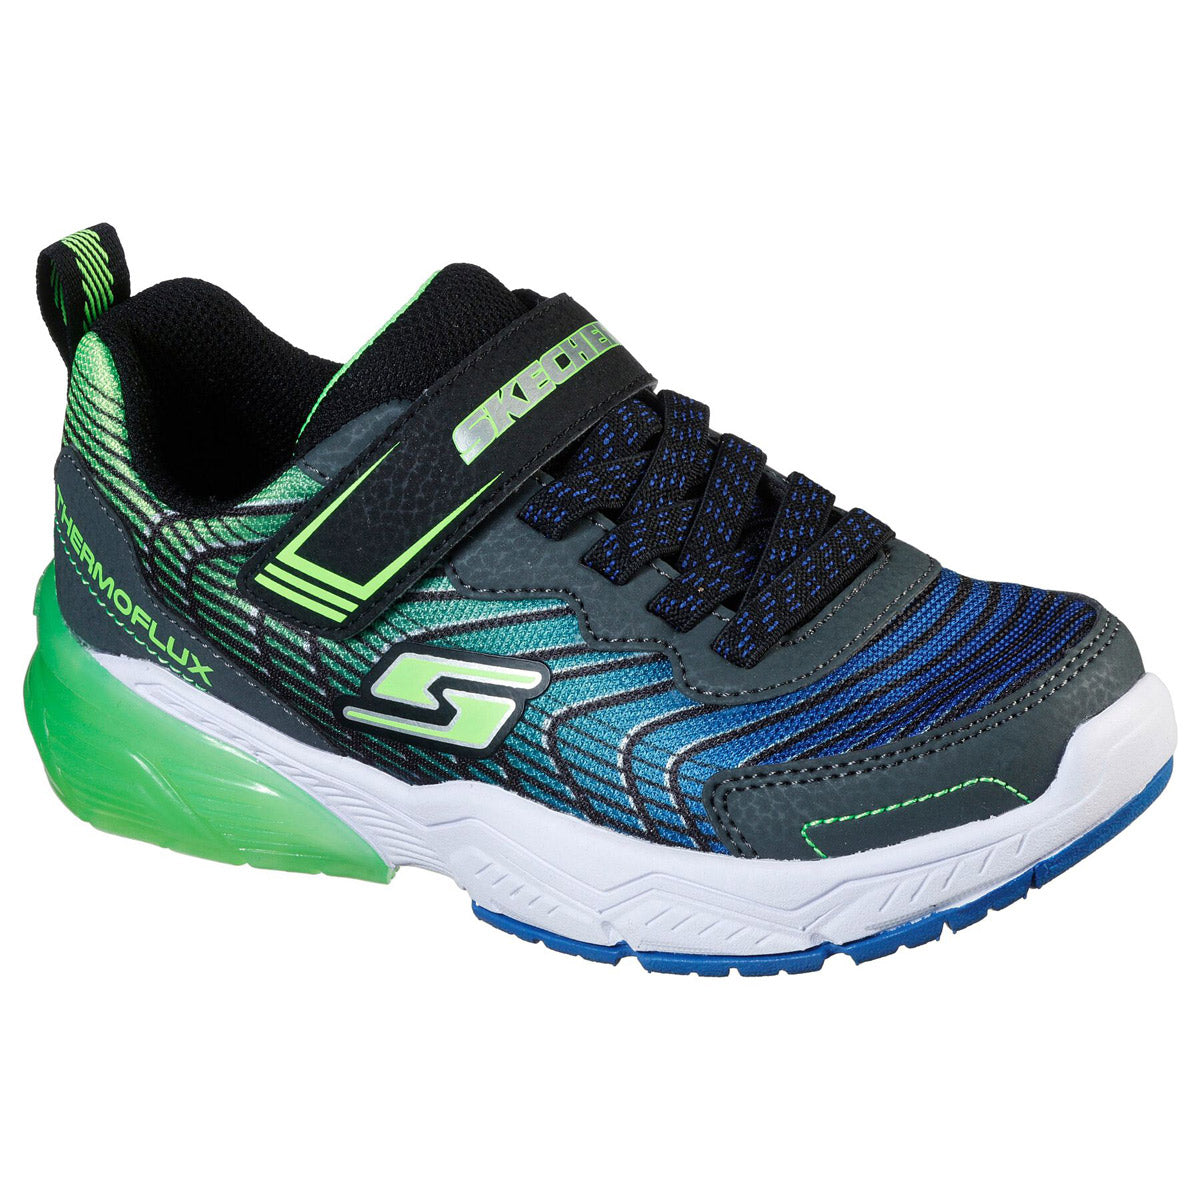 A single Skechers Thermoflux 2.0 Magnoid kid&#39;s shoe in black and blue, featuring neon green accents and white soles, designed as a sporty training sneaker.